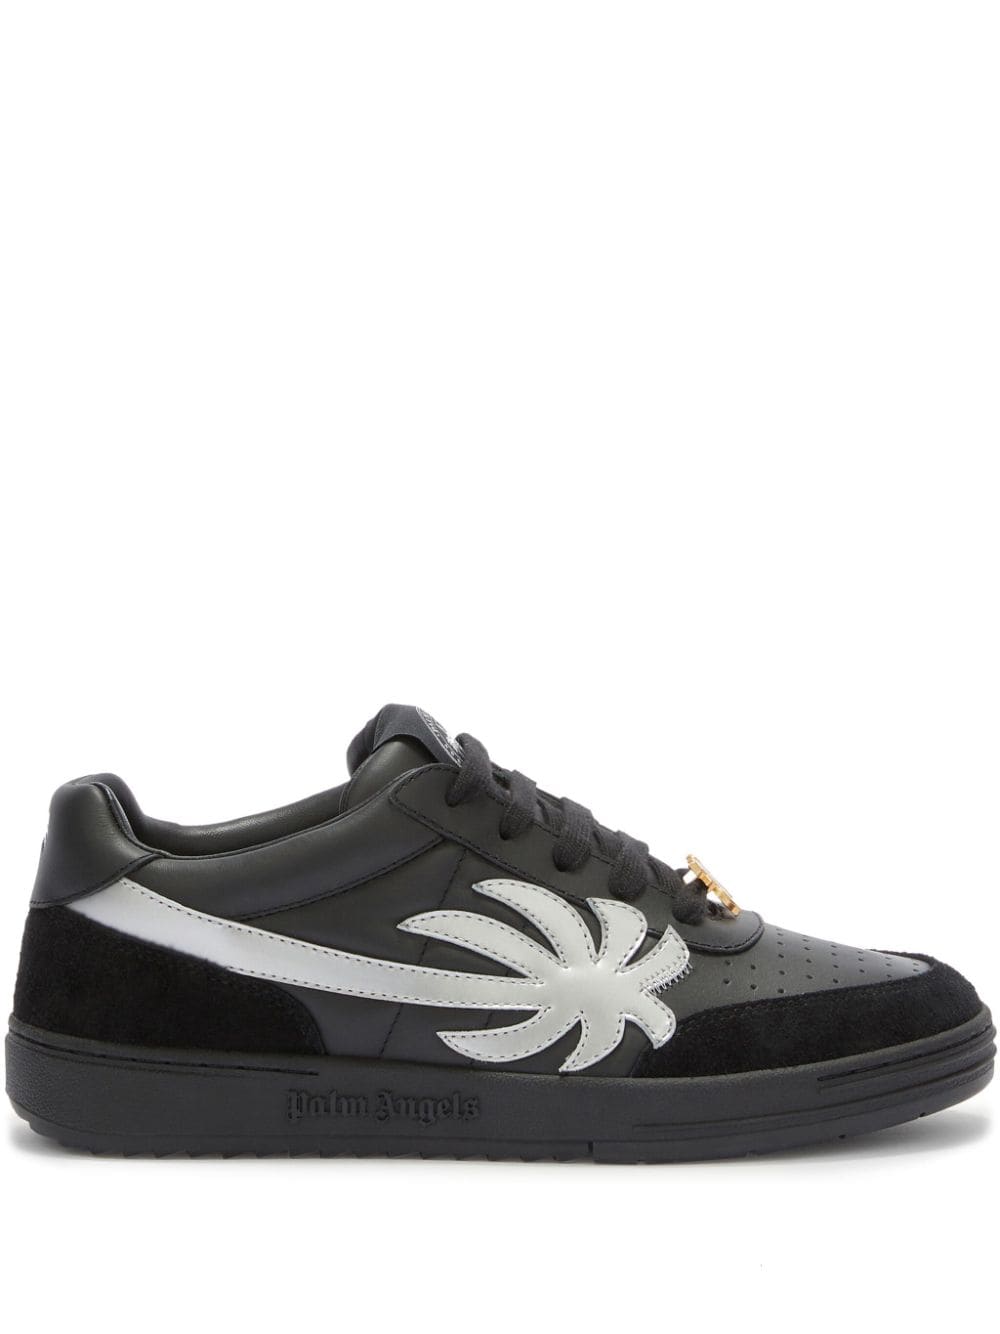 Palm Beach University leather sneakers